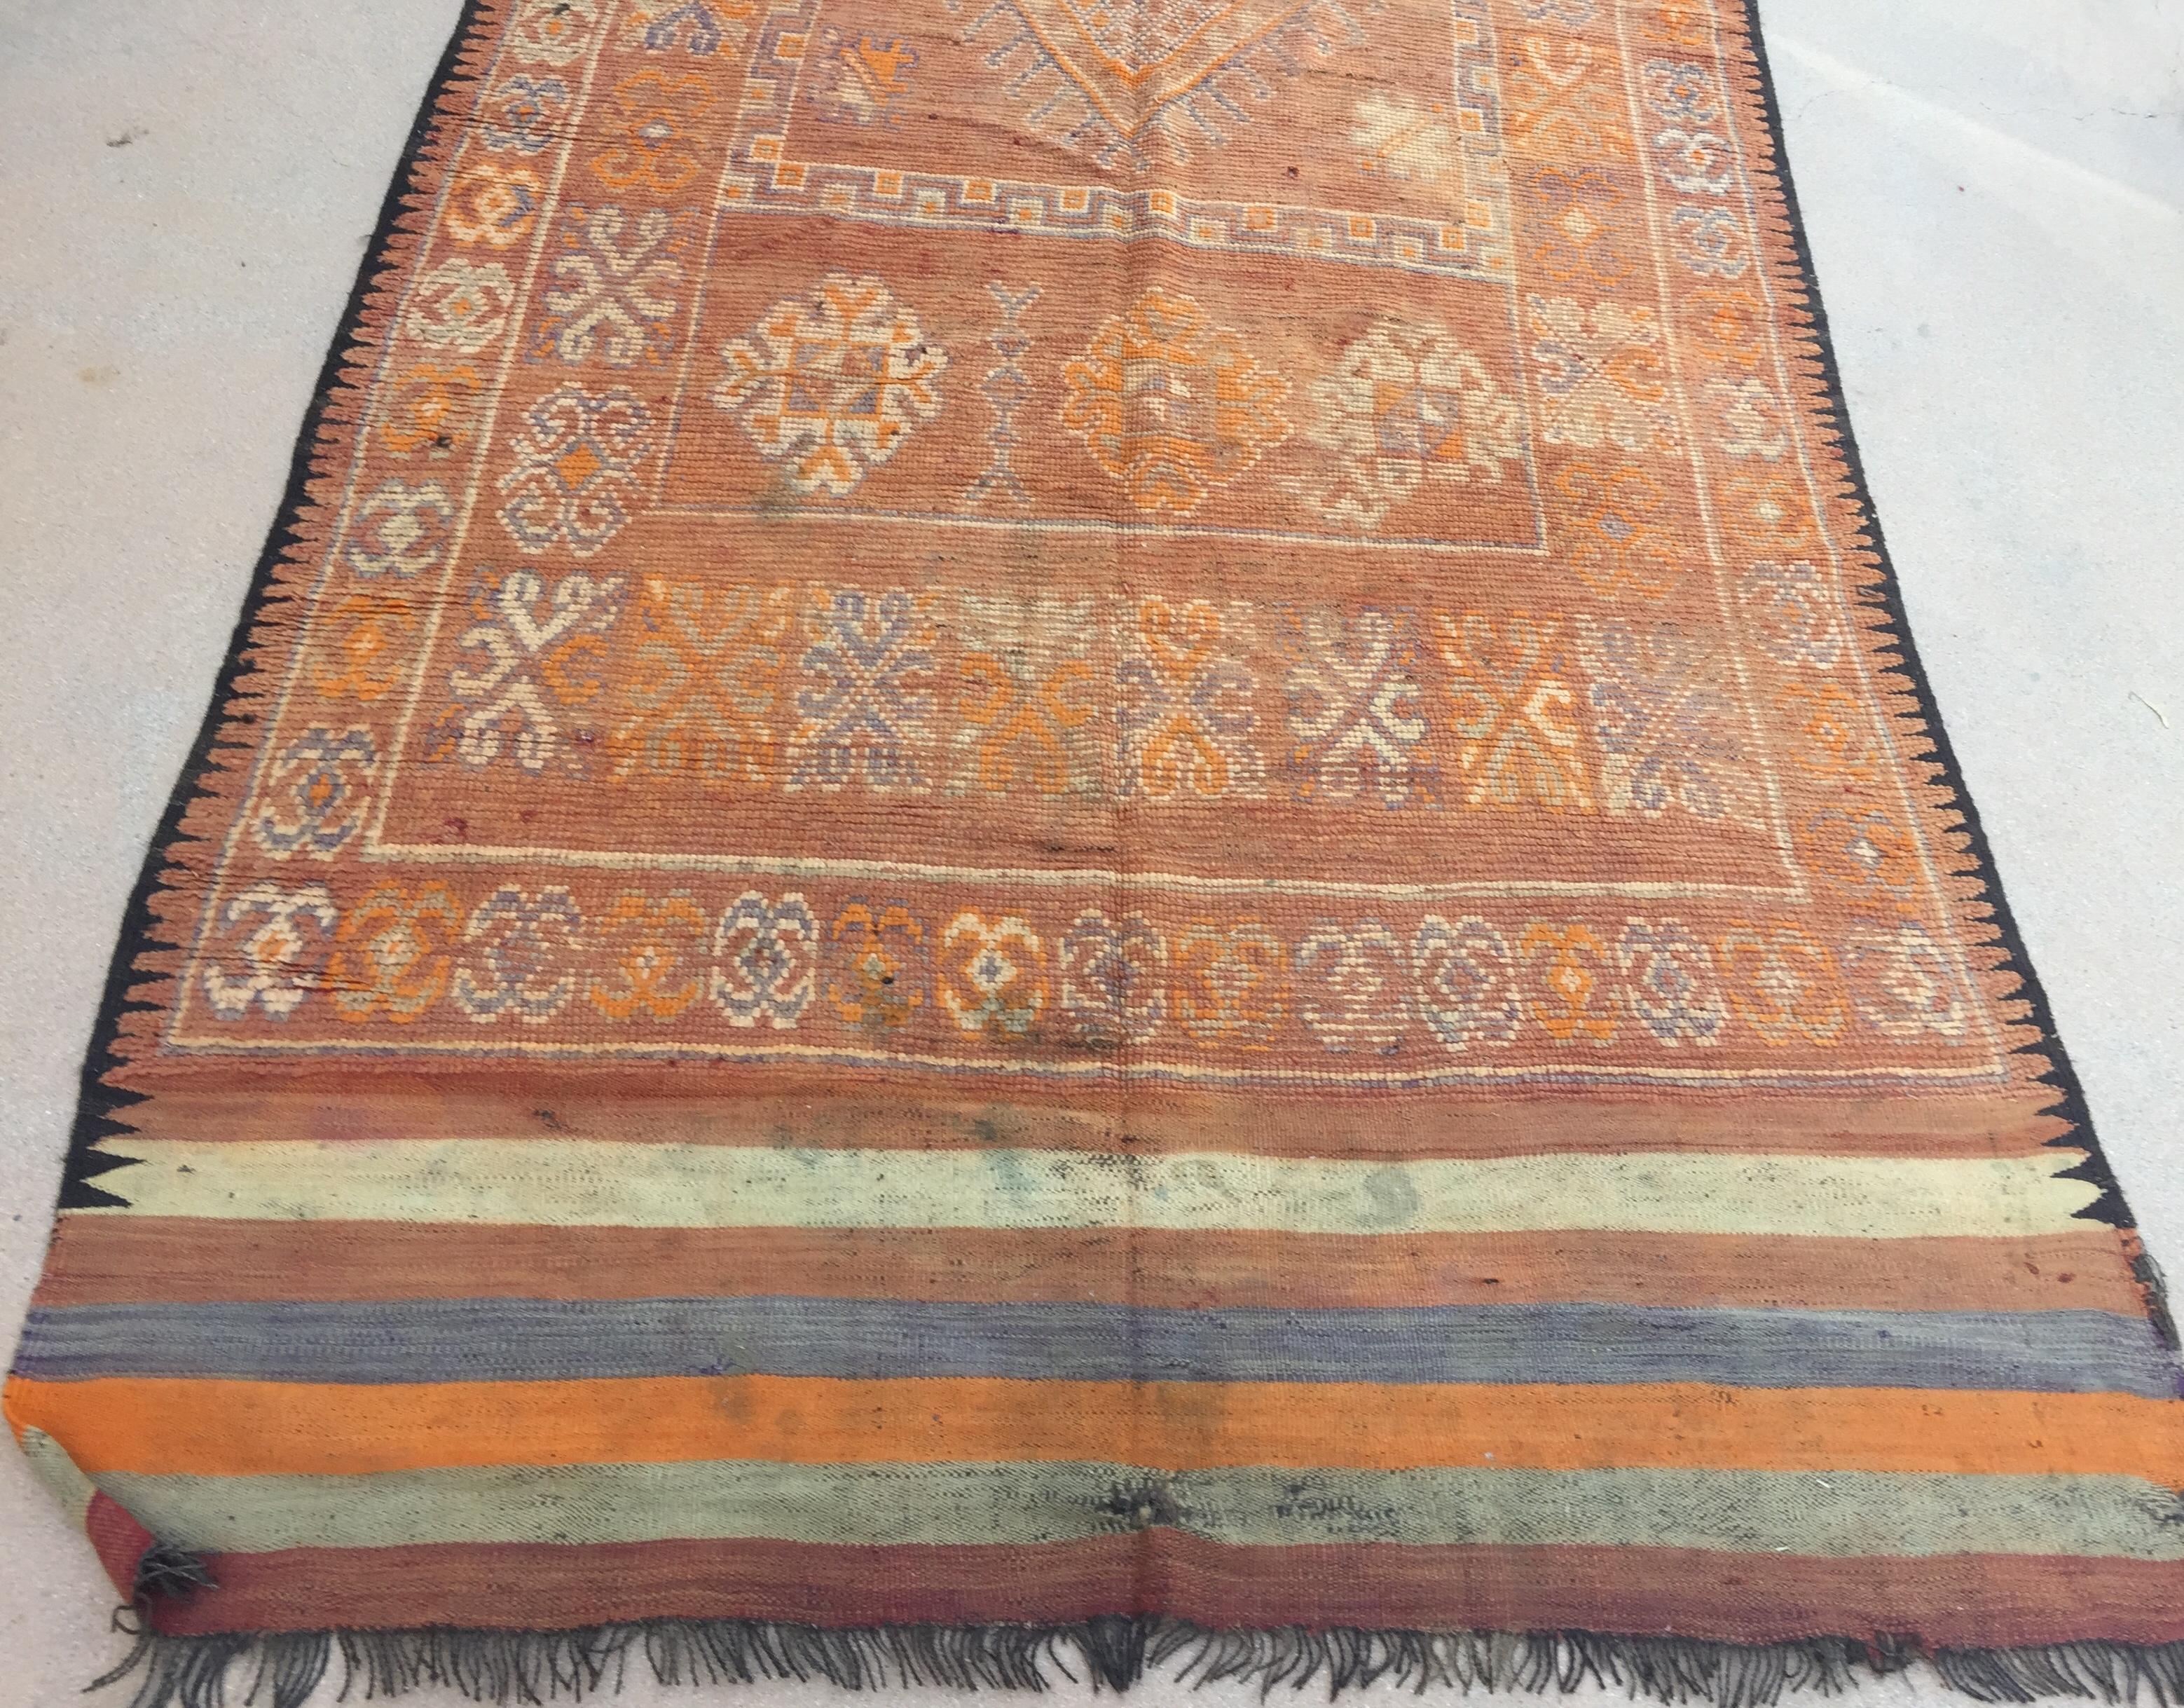 1960s Large handwoven vintage Moroccan Berber Tribal rug, nicely aged and faded with orange and blue cors.Midcentury Moroccan area rug with tribal geometric design on blue backgroundHandwoven by The Berber tribes in Morocco with traditional